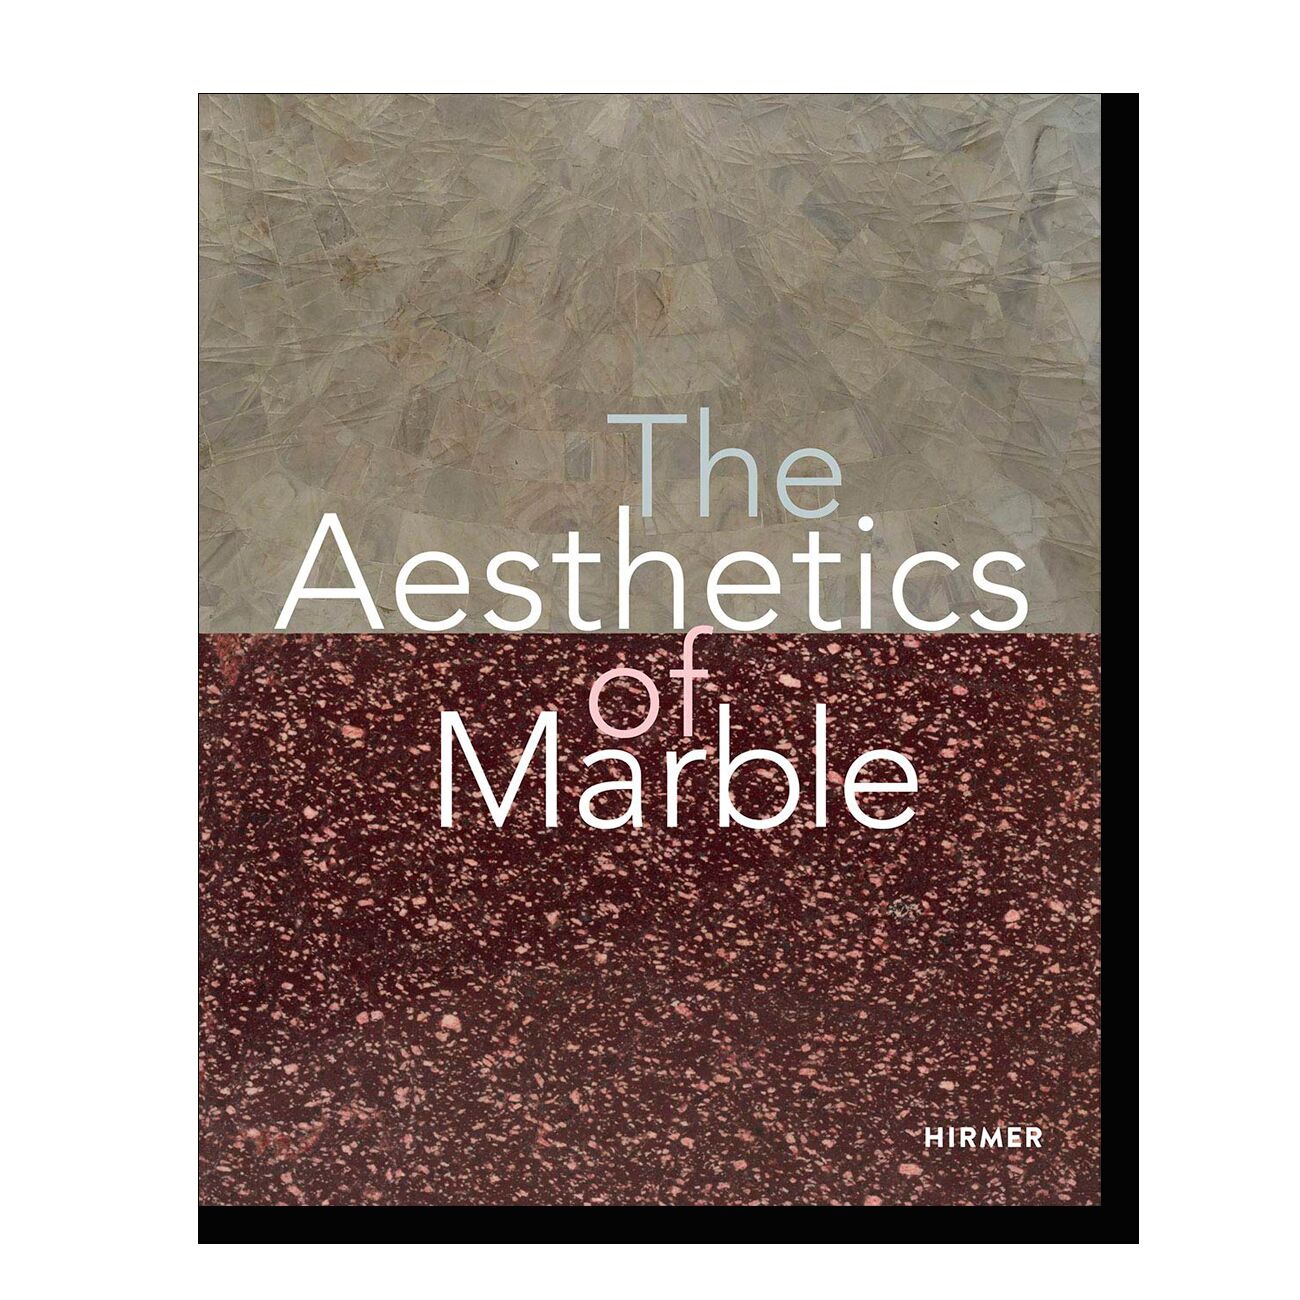 The Aesthetics of Marble: From Late Antiquity to the Present